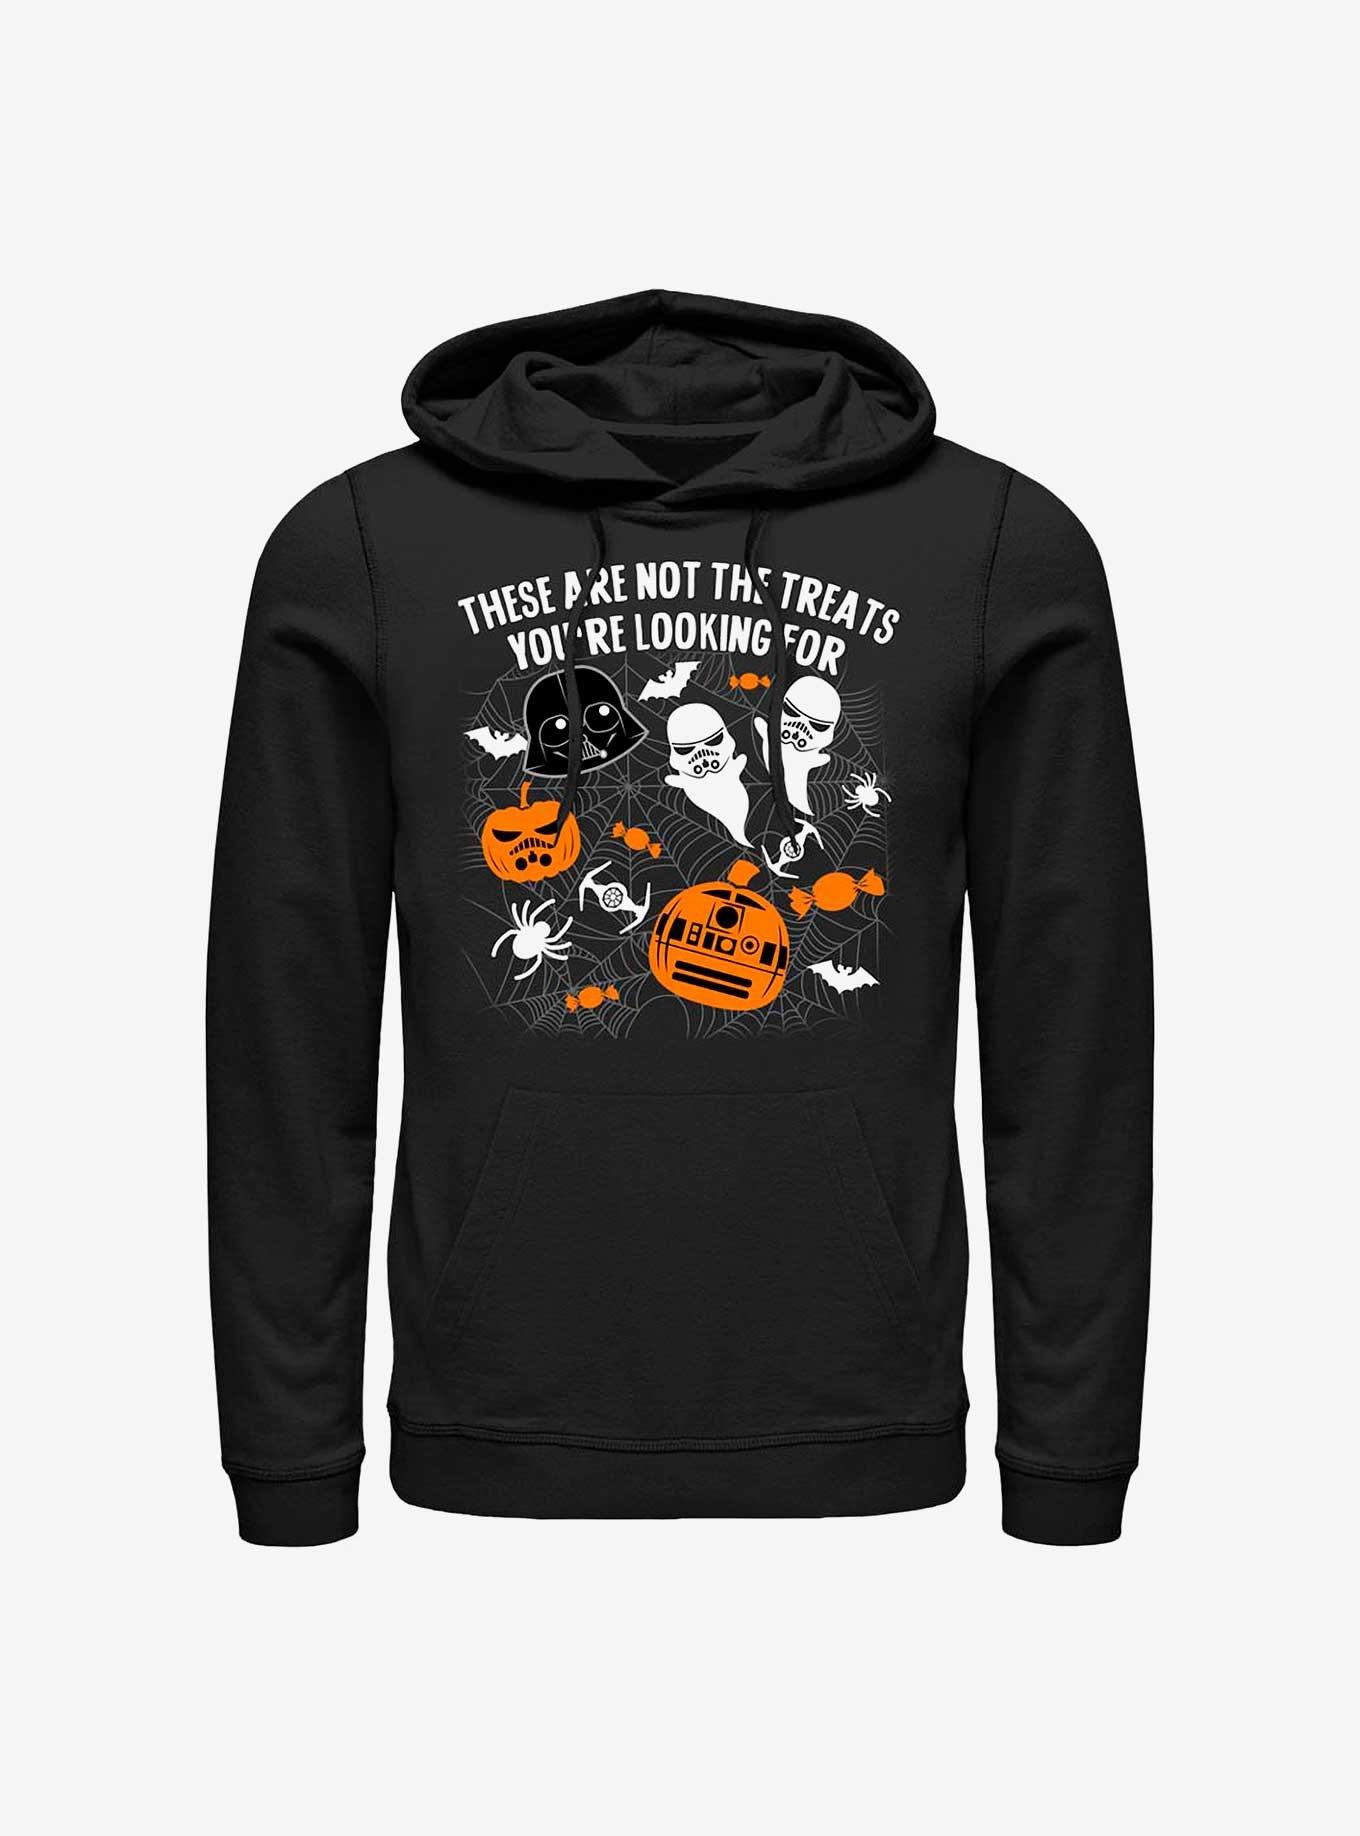 Star Wars Not The Treats You're Looking For Hoodie, BLACK, hi-res